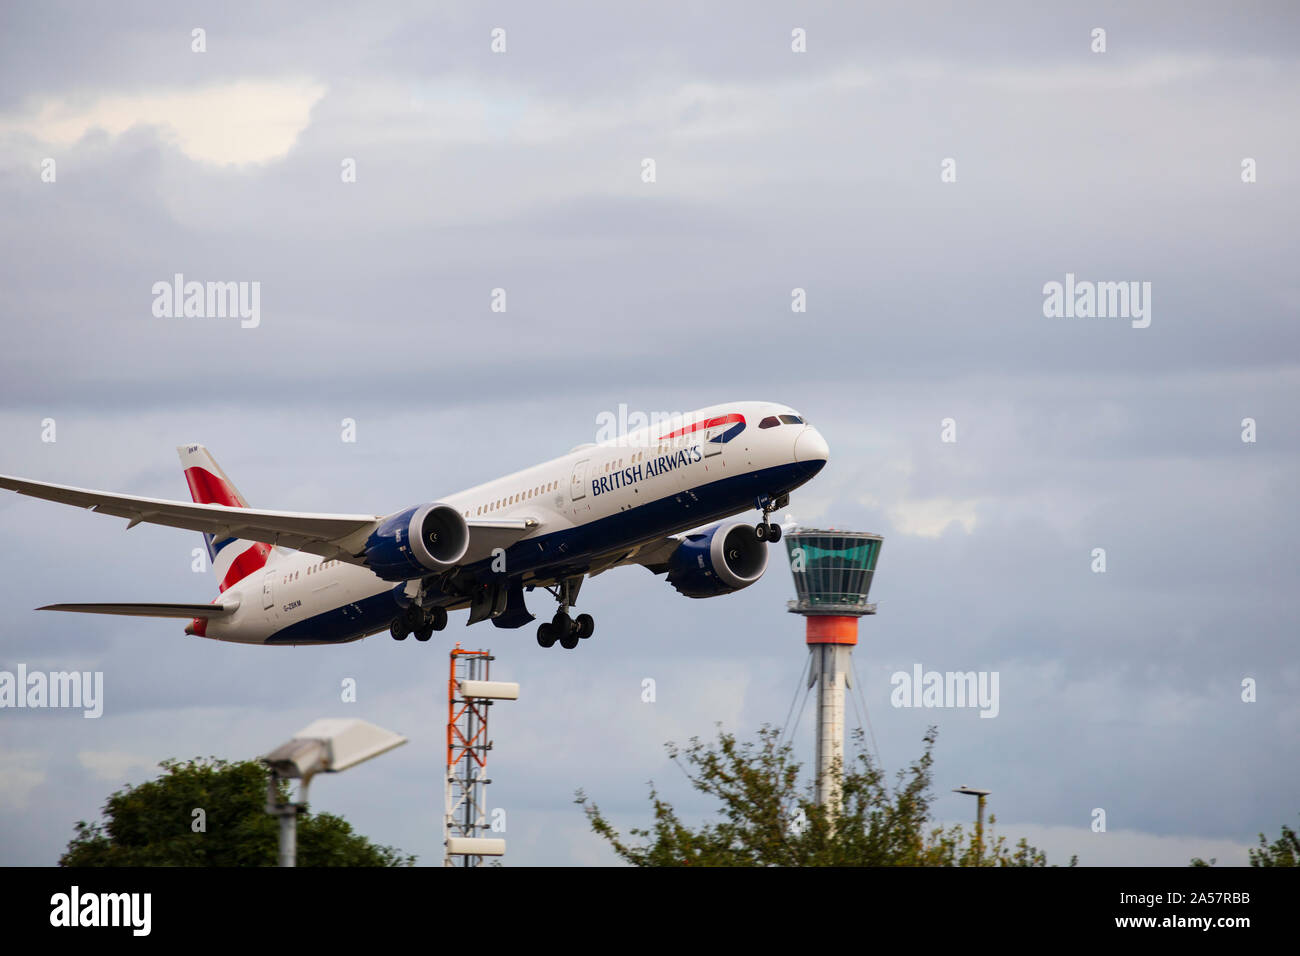 British Airways Boeing 787-9 airliner taking off from London Heathrow Airport. England. October 2019 Stock Photo